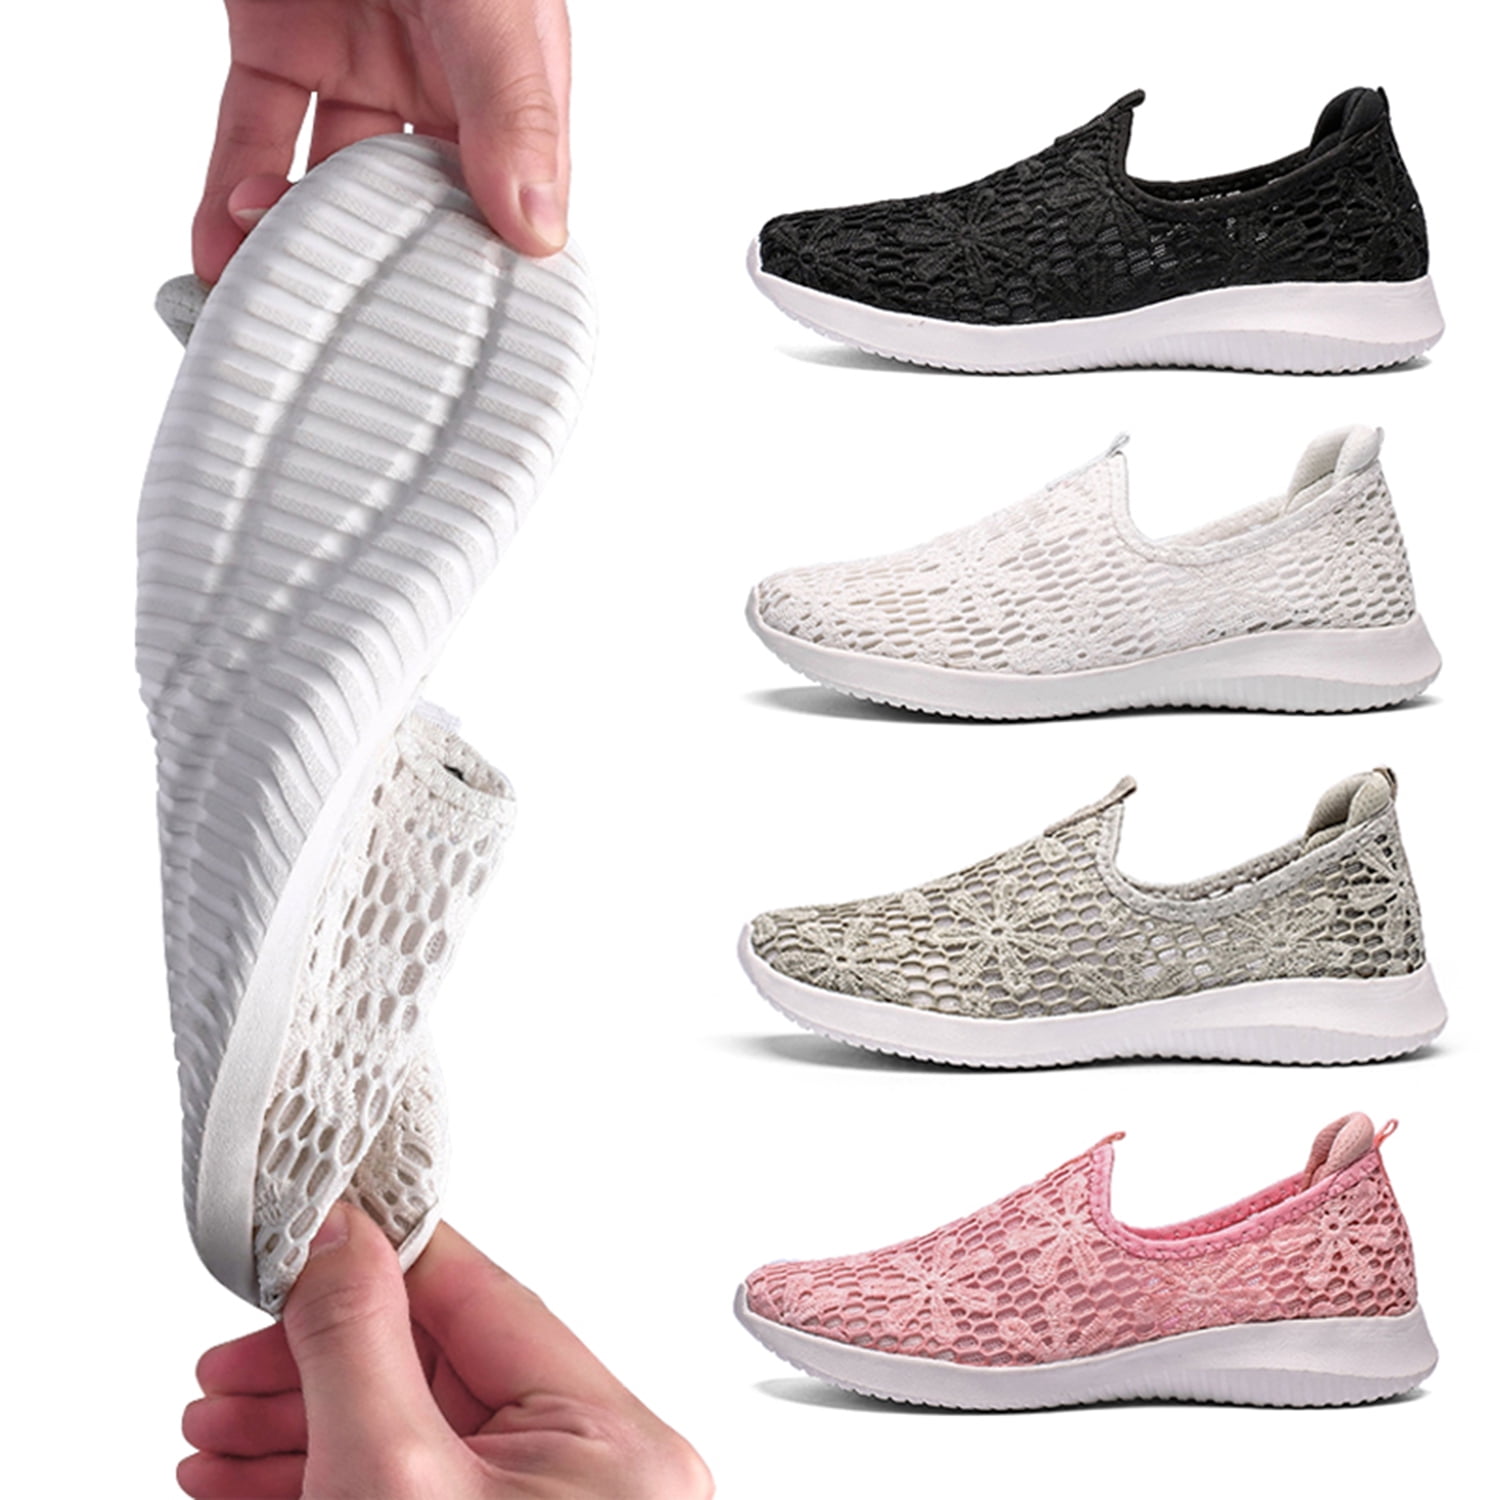 Womens Casual Mesh Sneakers Summer Low Top Comfortable Slip On Shoes Lightweight Breathable Trail Running Walking Shoe